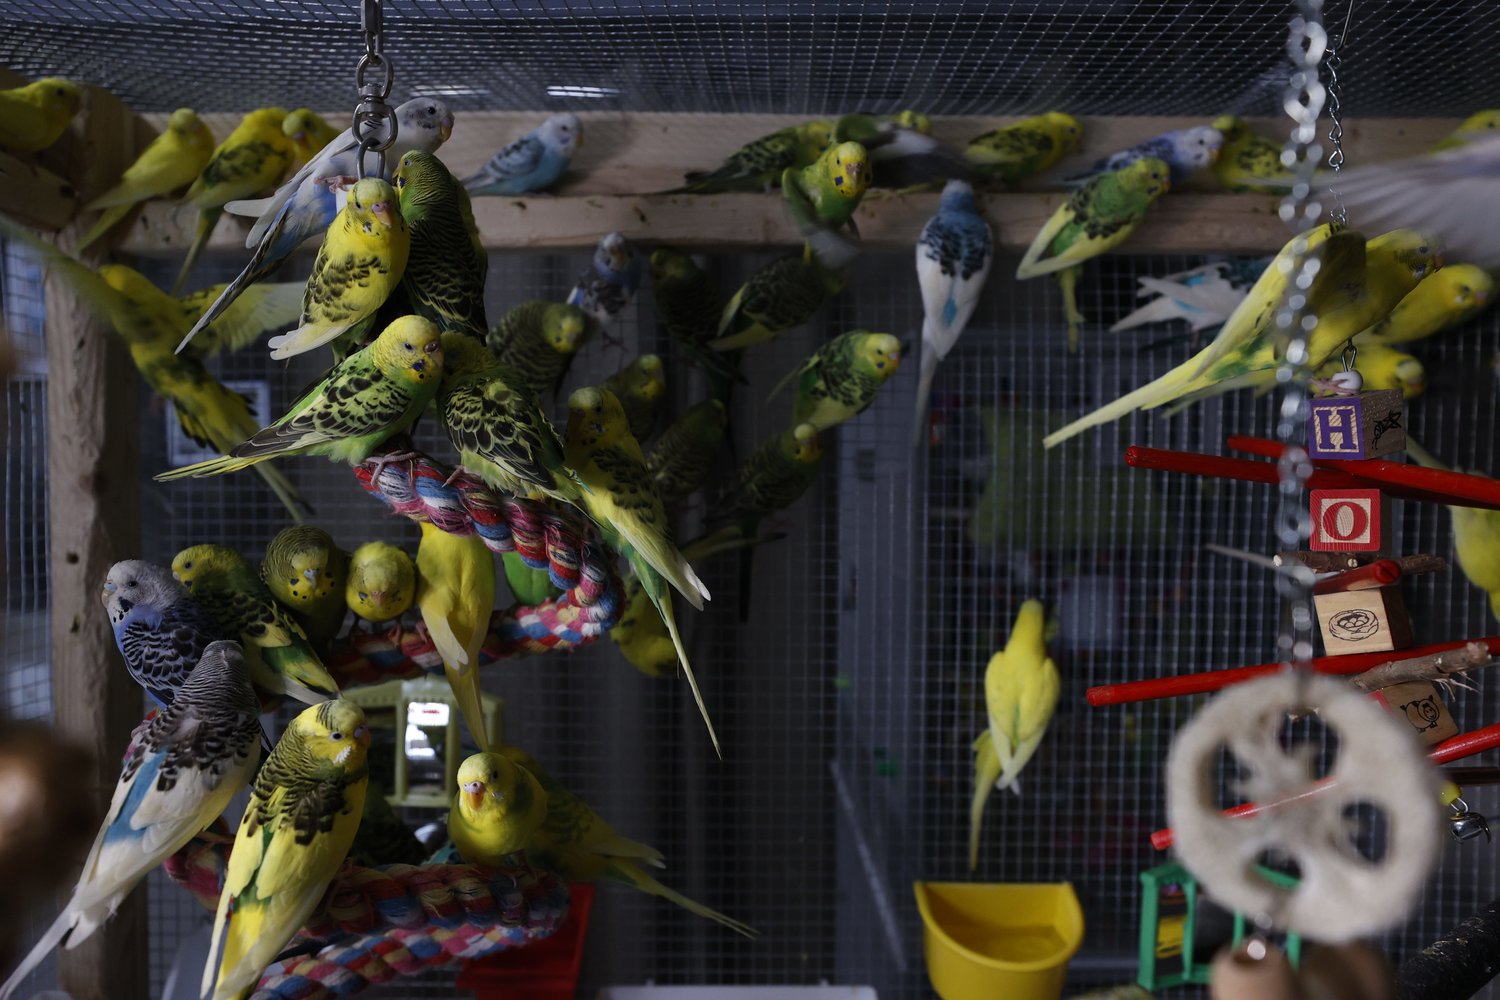 There are currently 210 parakeets that the business is keeping of the 800 plus that were rescued last week. Anne Jewett, 39, of Sterling Heights and a co-owner of Jojo’s Flying Friends, says the birds will be available for adoption starting on Jan. 23, 2022, with an estimated adoption fee of $30 per bird. (Eric Seals/Detroit Free Press/TNS)